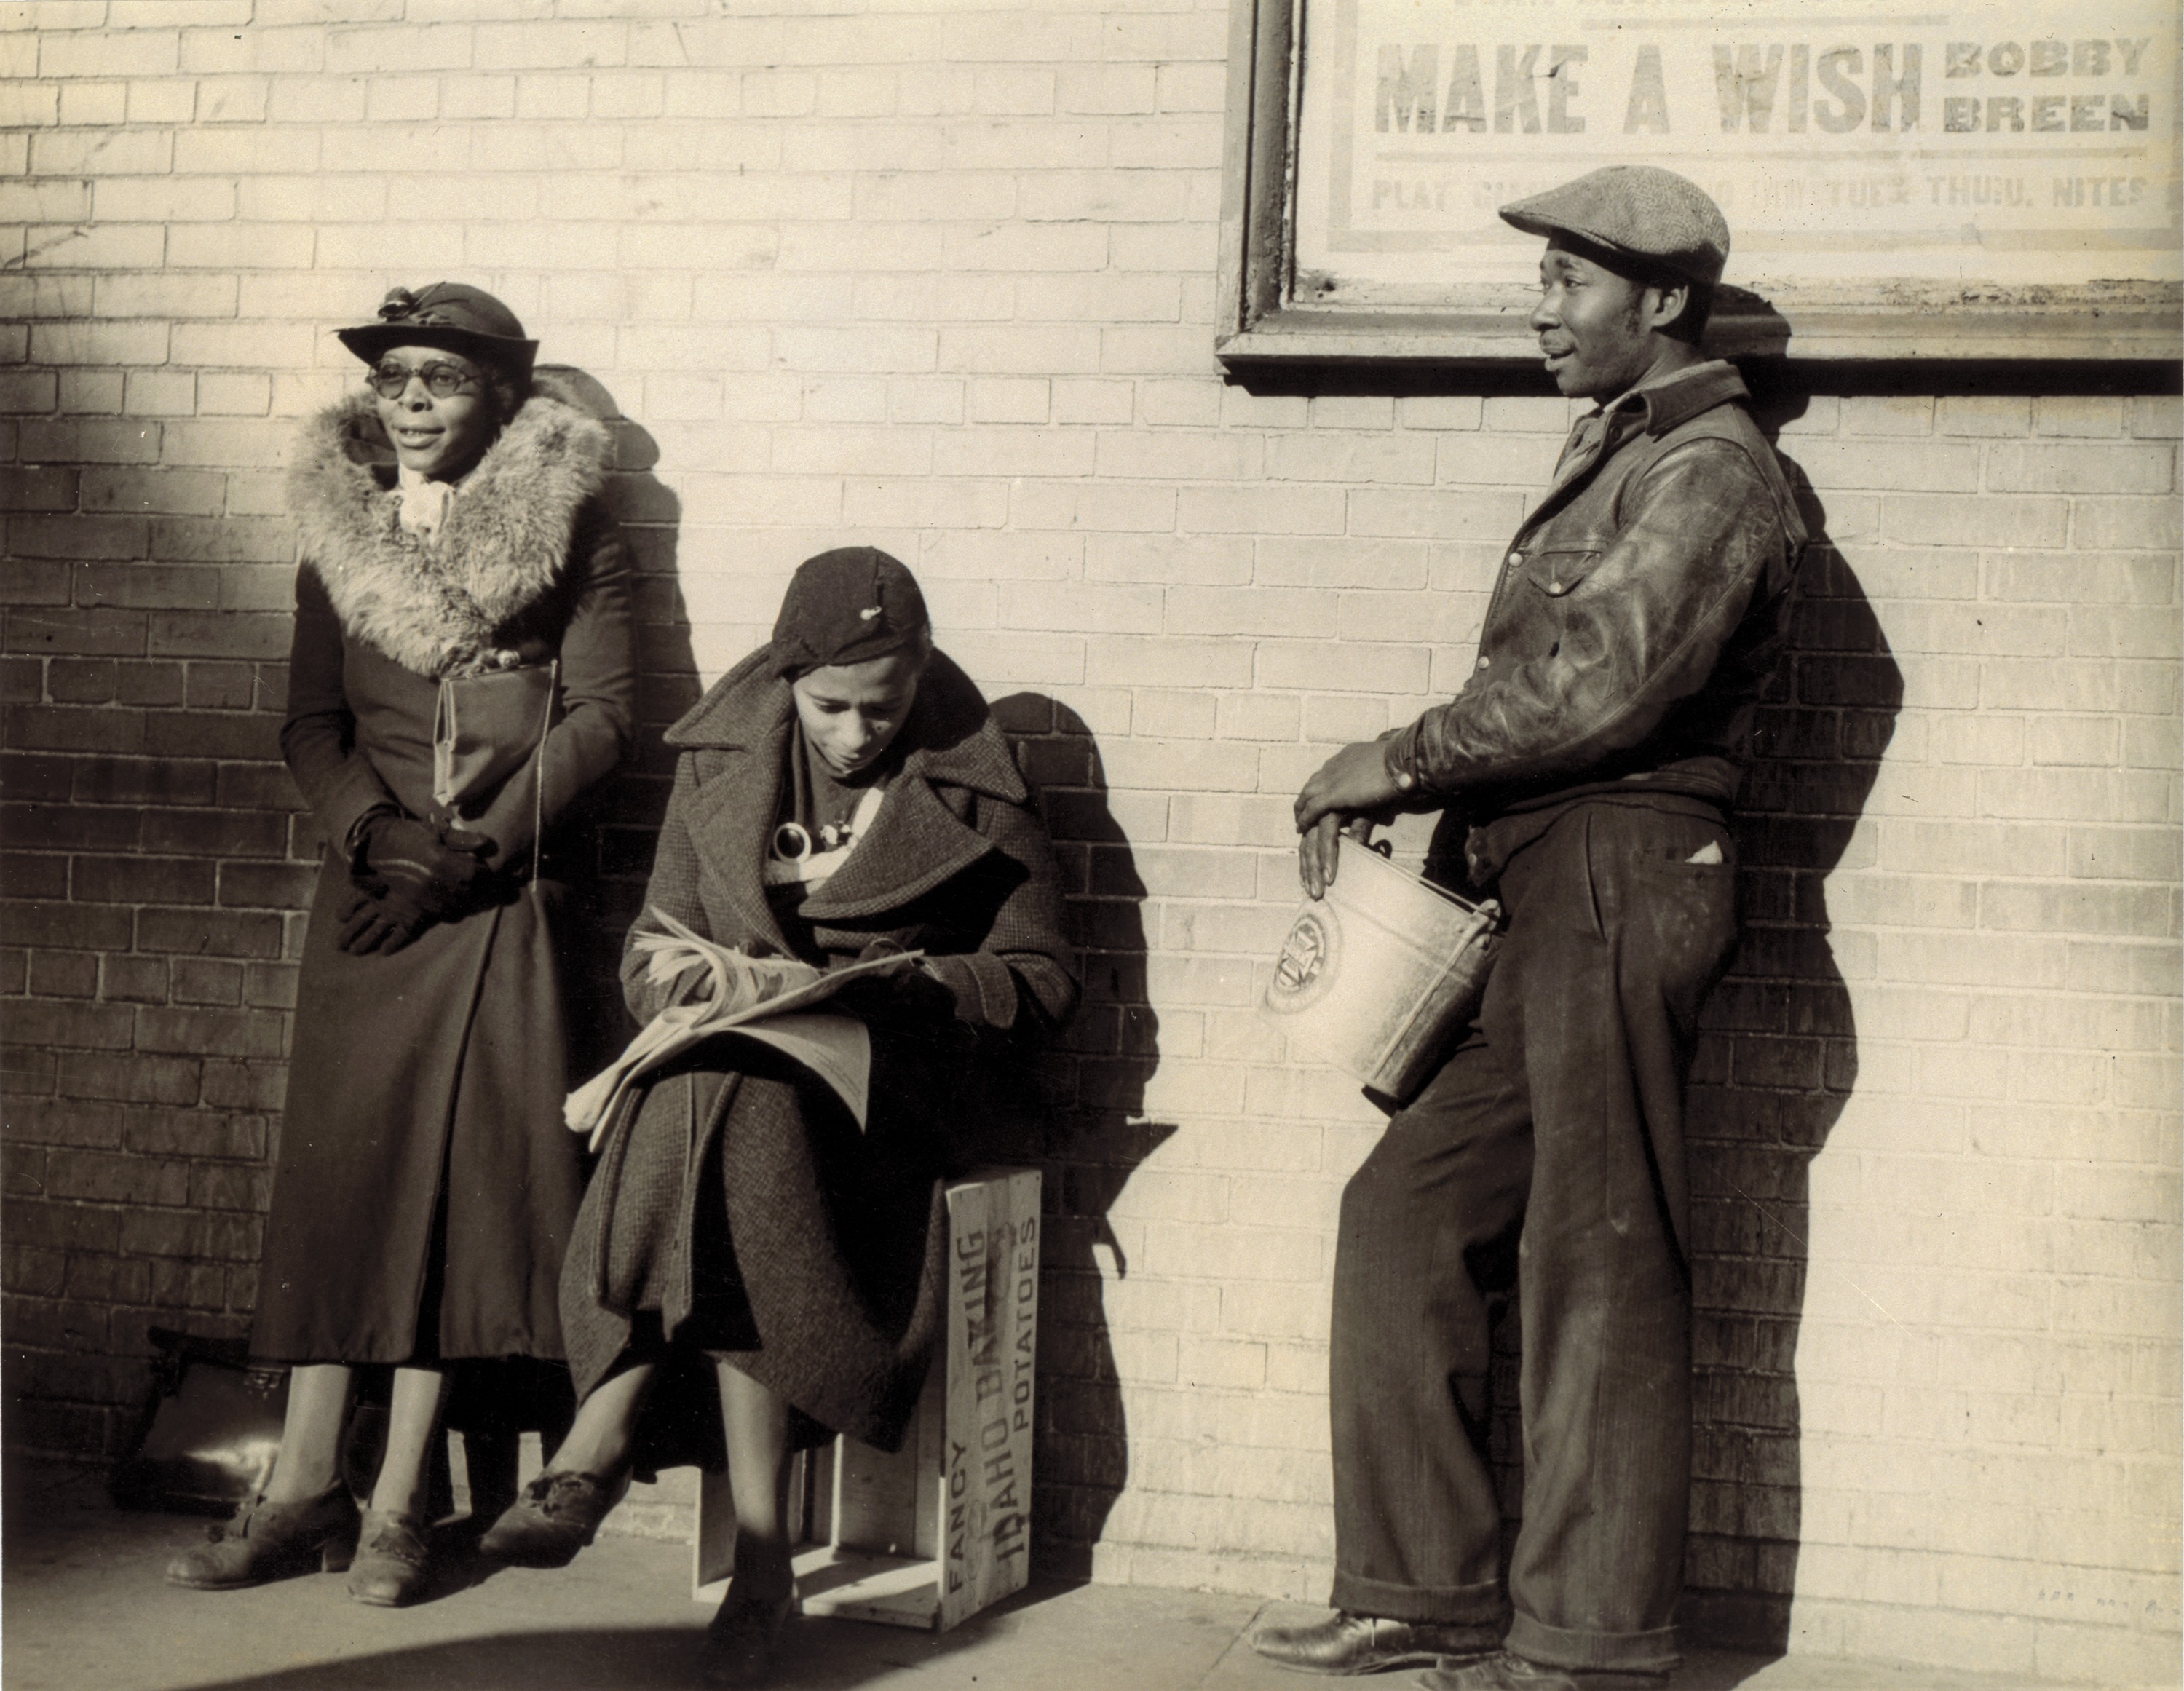 Black and white photograph showing two Black women and one man wearing coats and hats lean against a wall, waiting for employment. A movie poster behind them reads "Make a Wish."